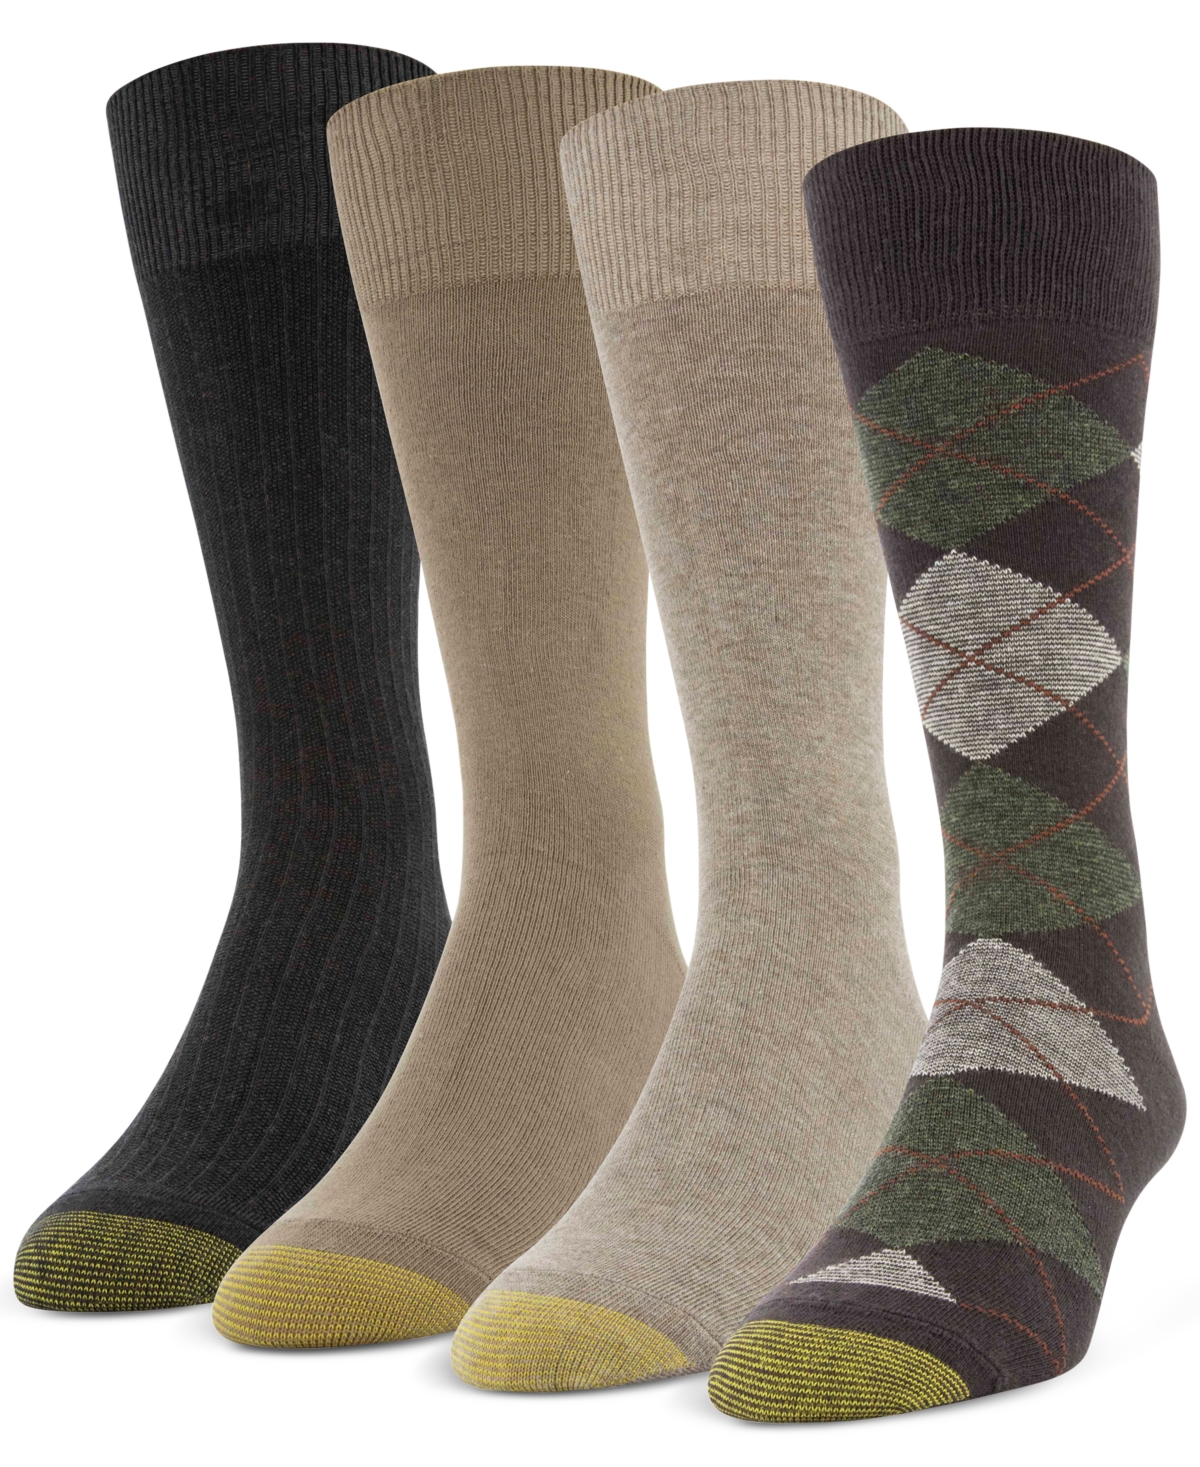 Men's 4-Pack Casual Argyle Crew Socks - Brown Heather, Taupe Heather, Taupe, Bro